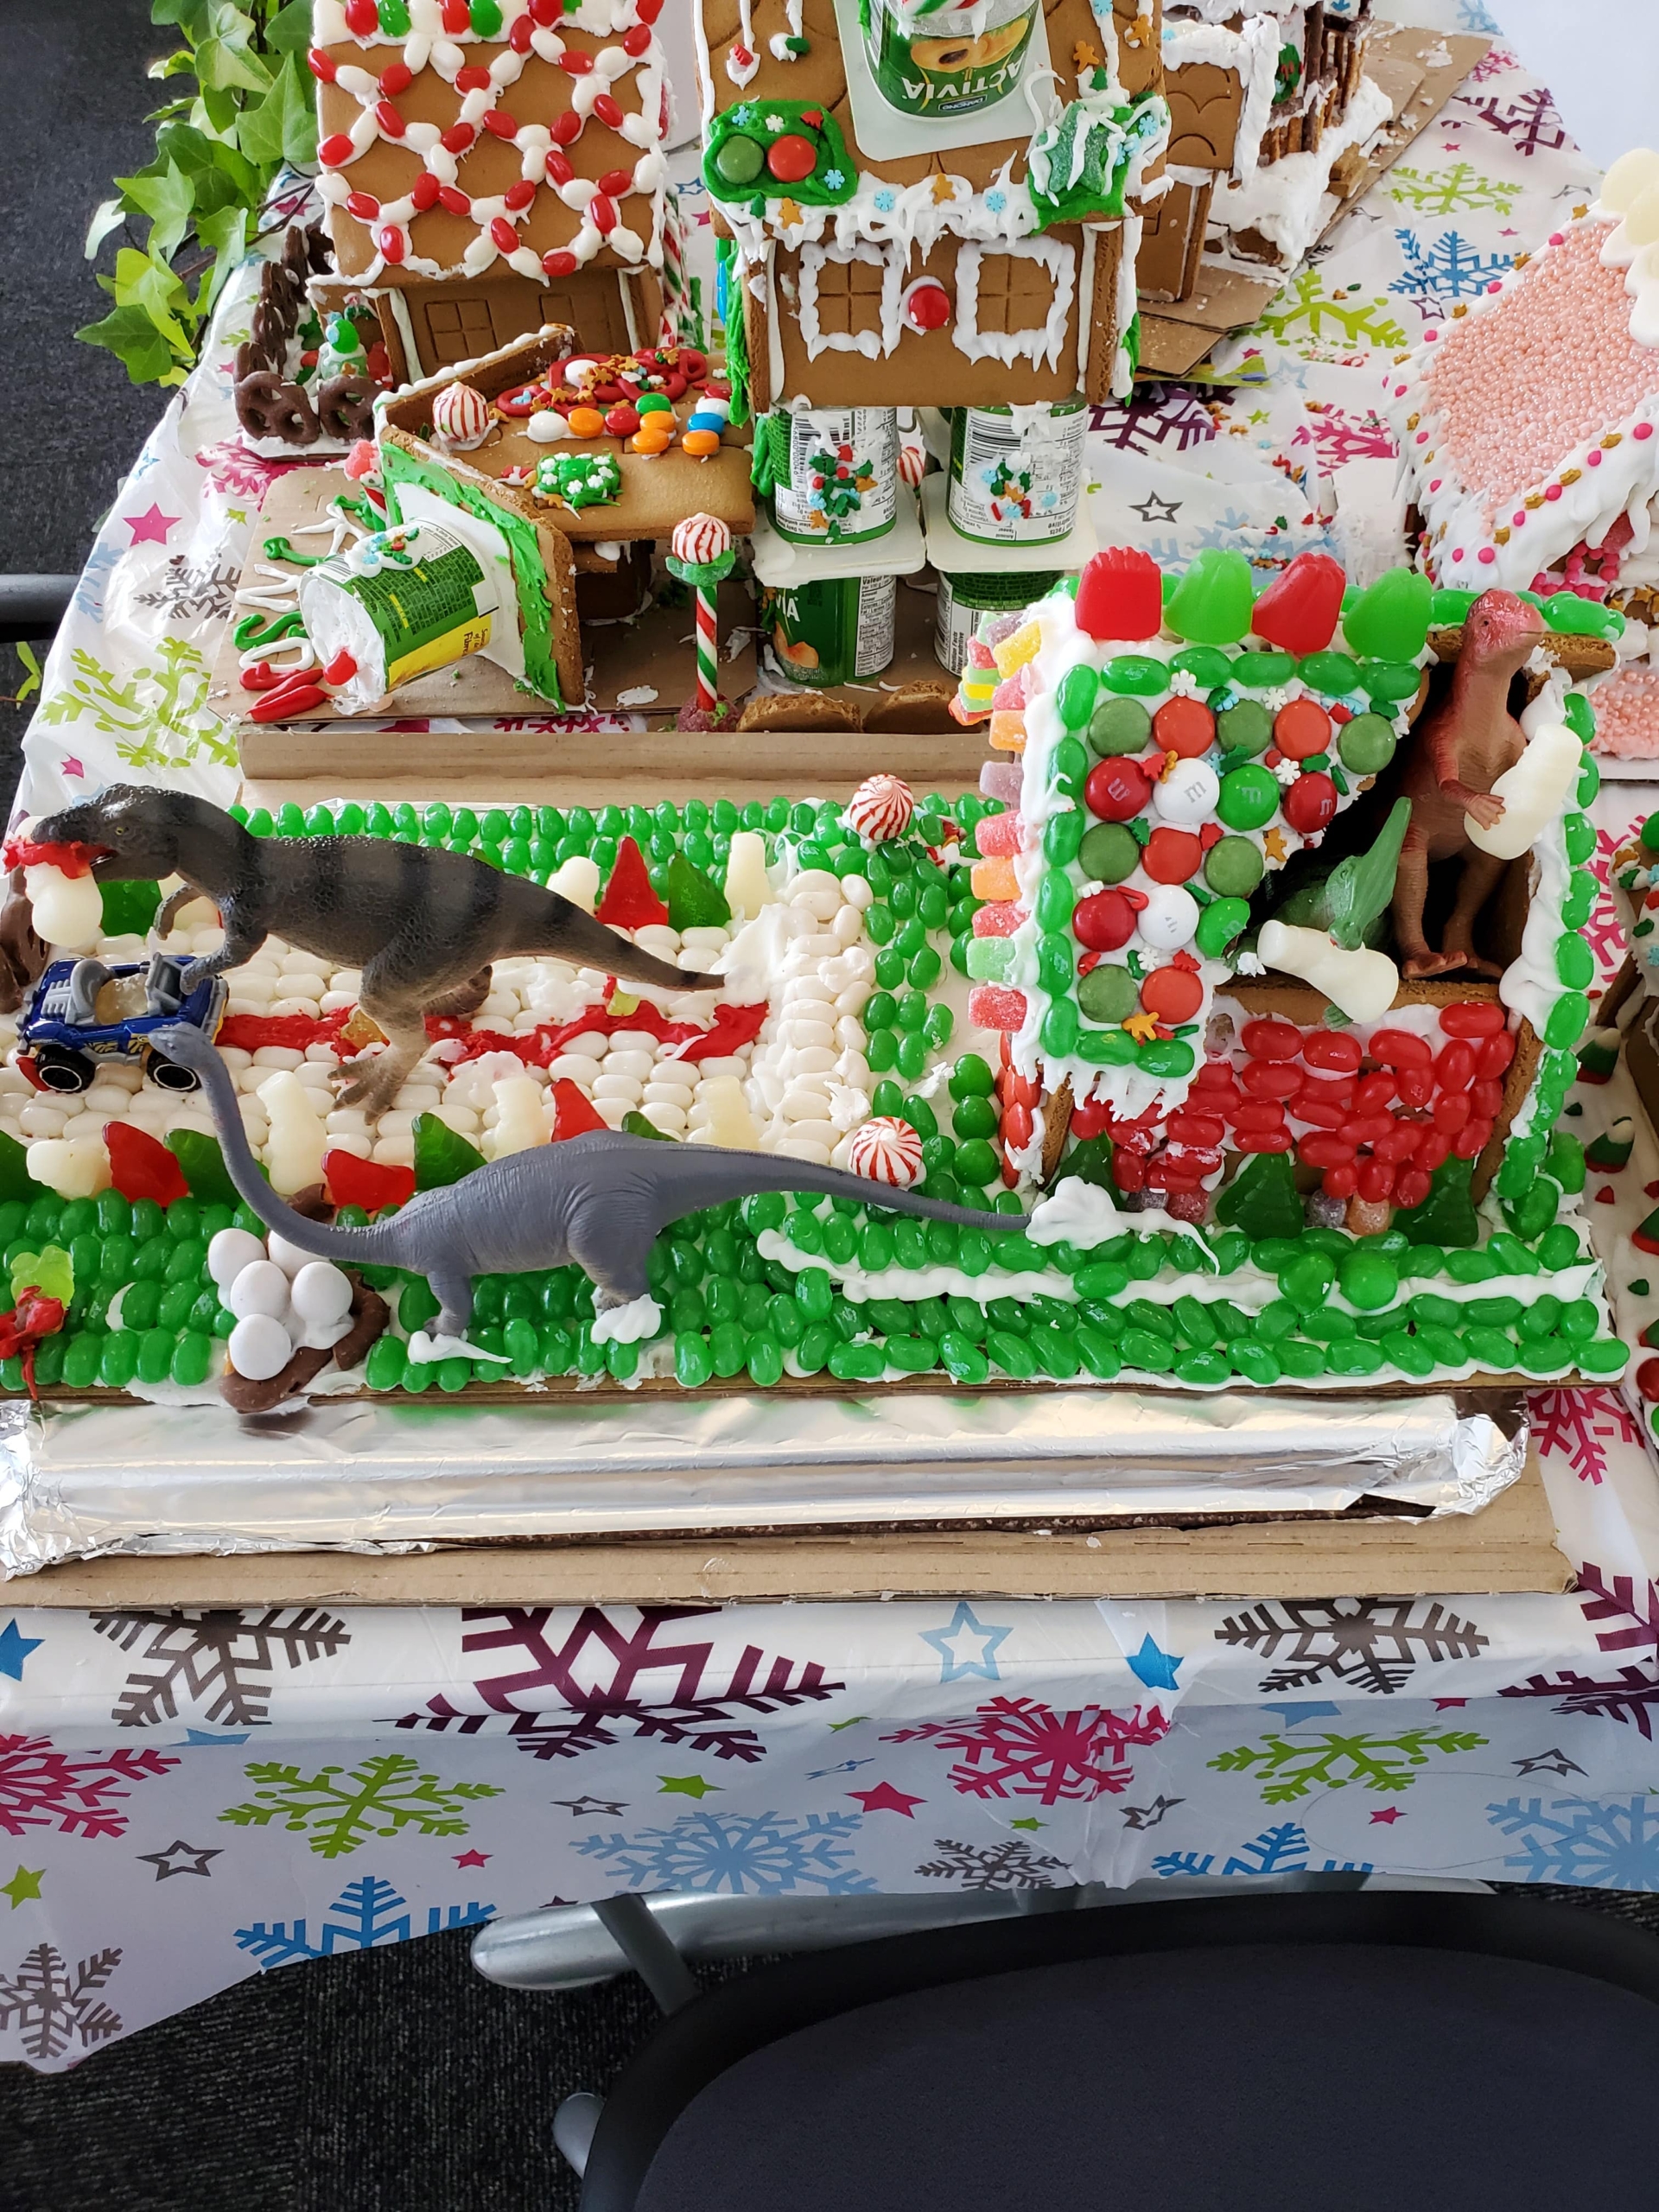 Ditlev Lab gingerbread house. There are dinosaurs on lawn in front of the gingerbread house.